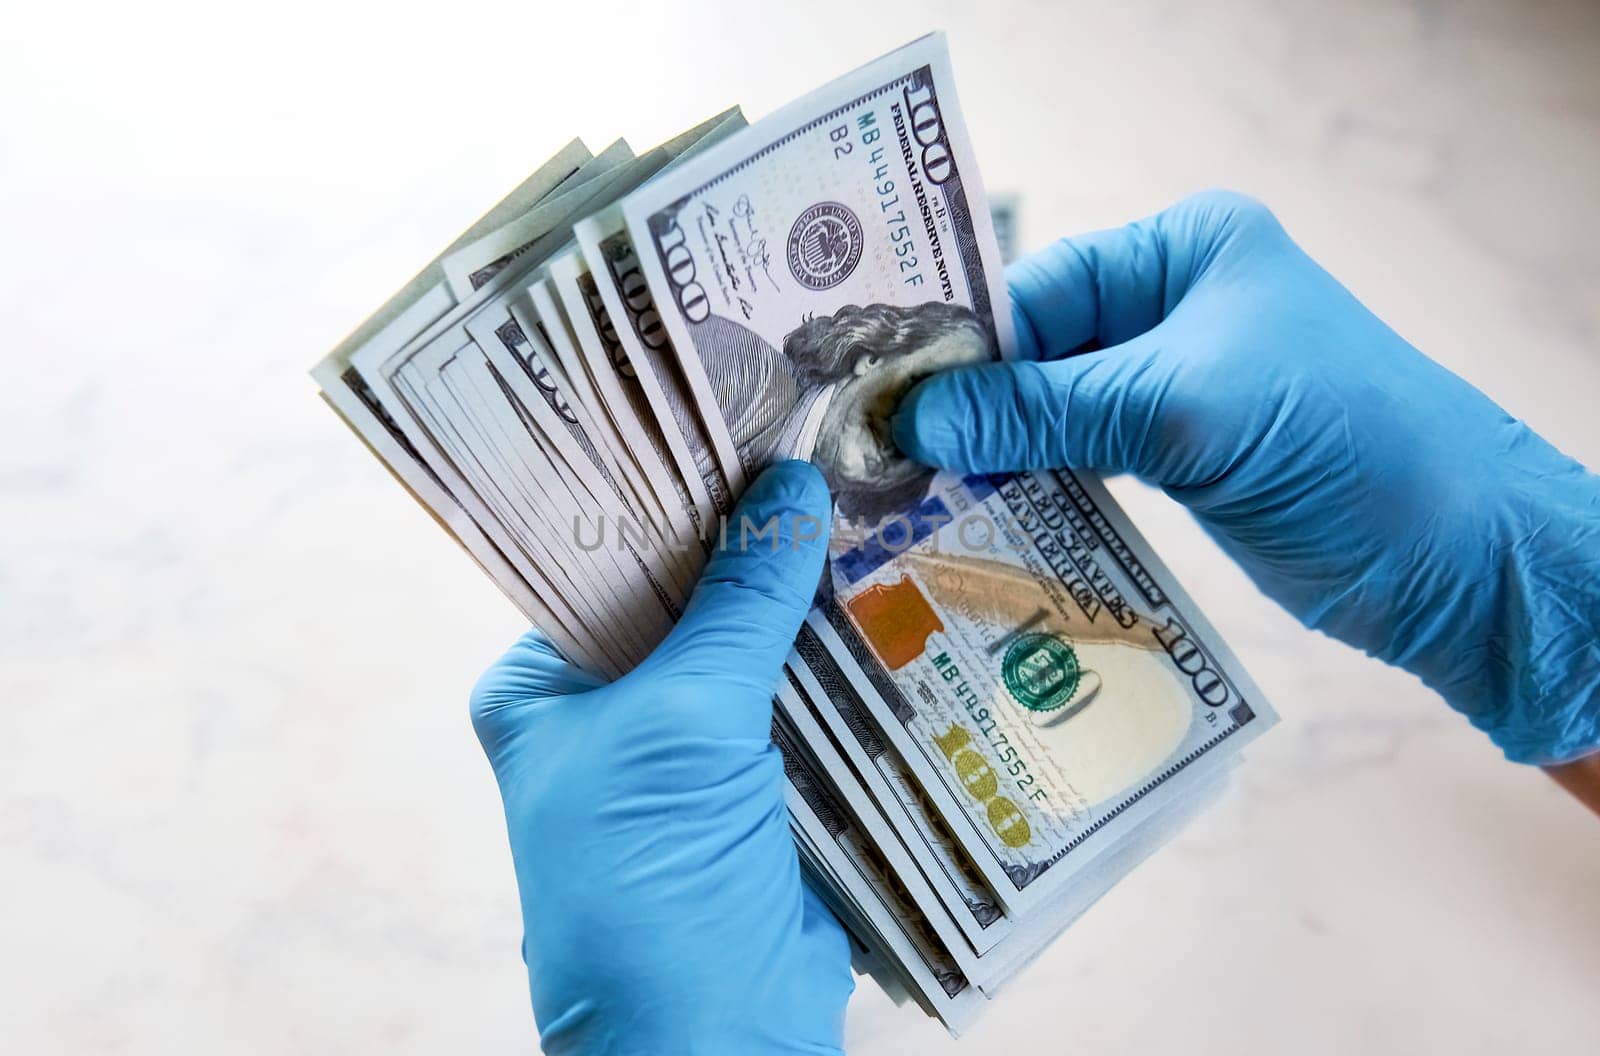 secure money transfer. hand in a rubber glove takes money. by Hil